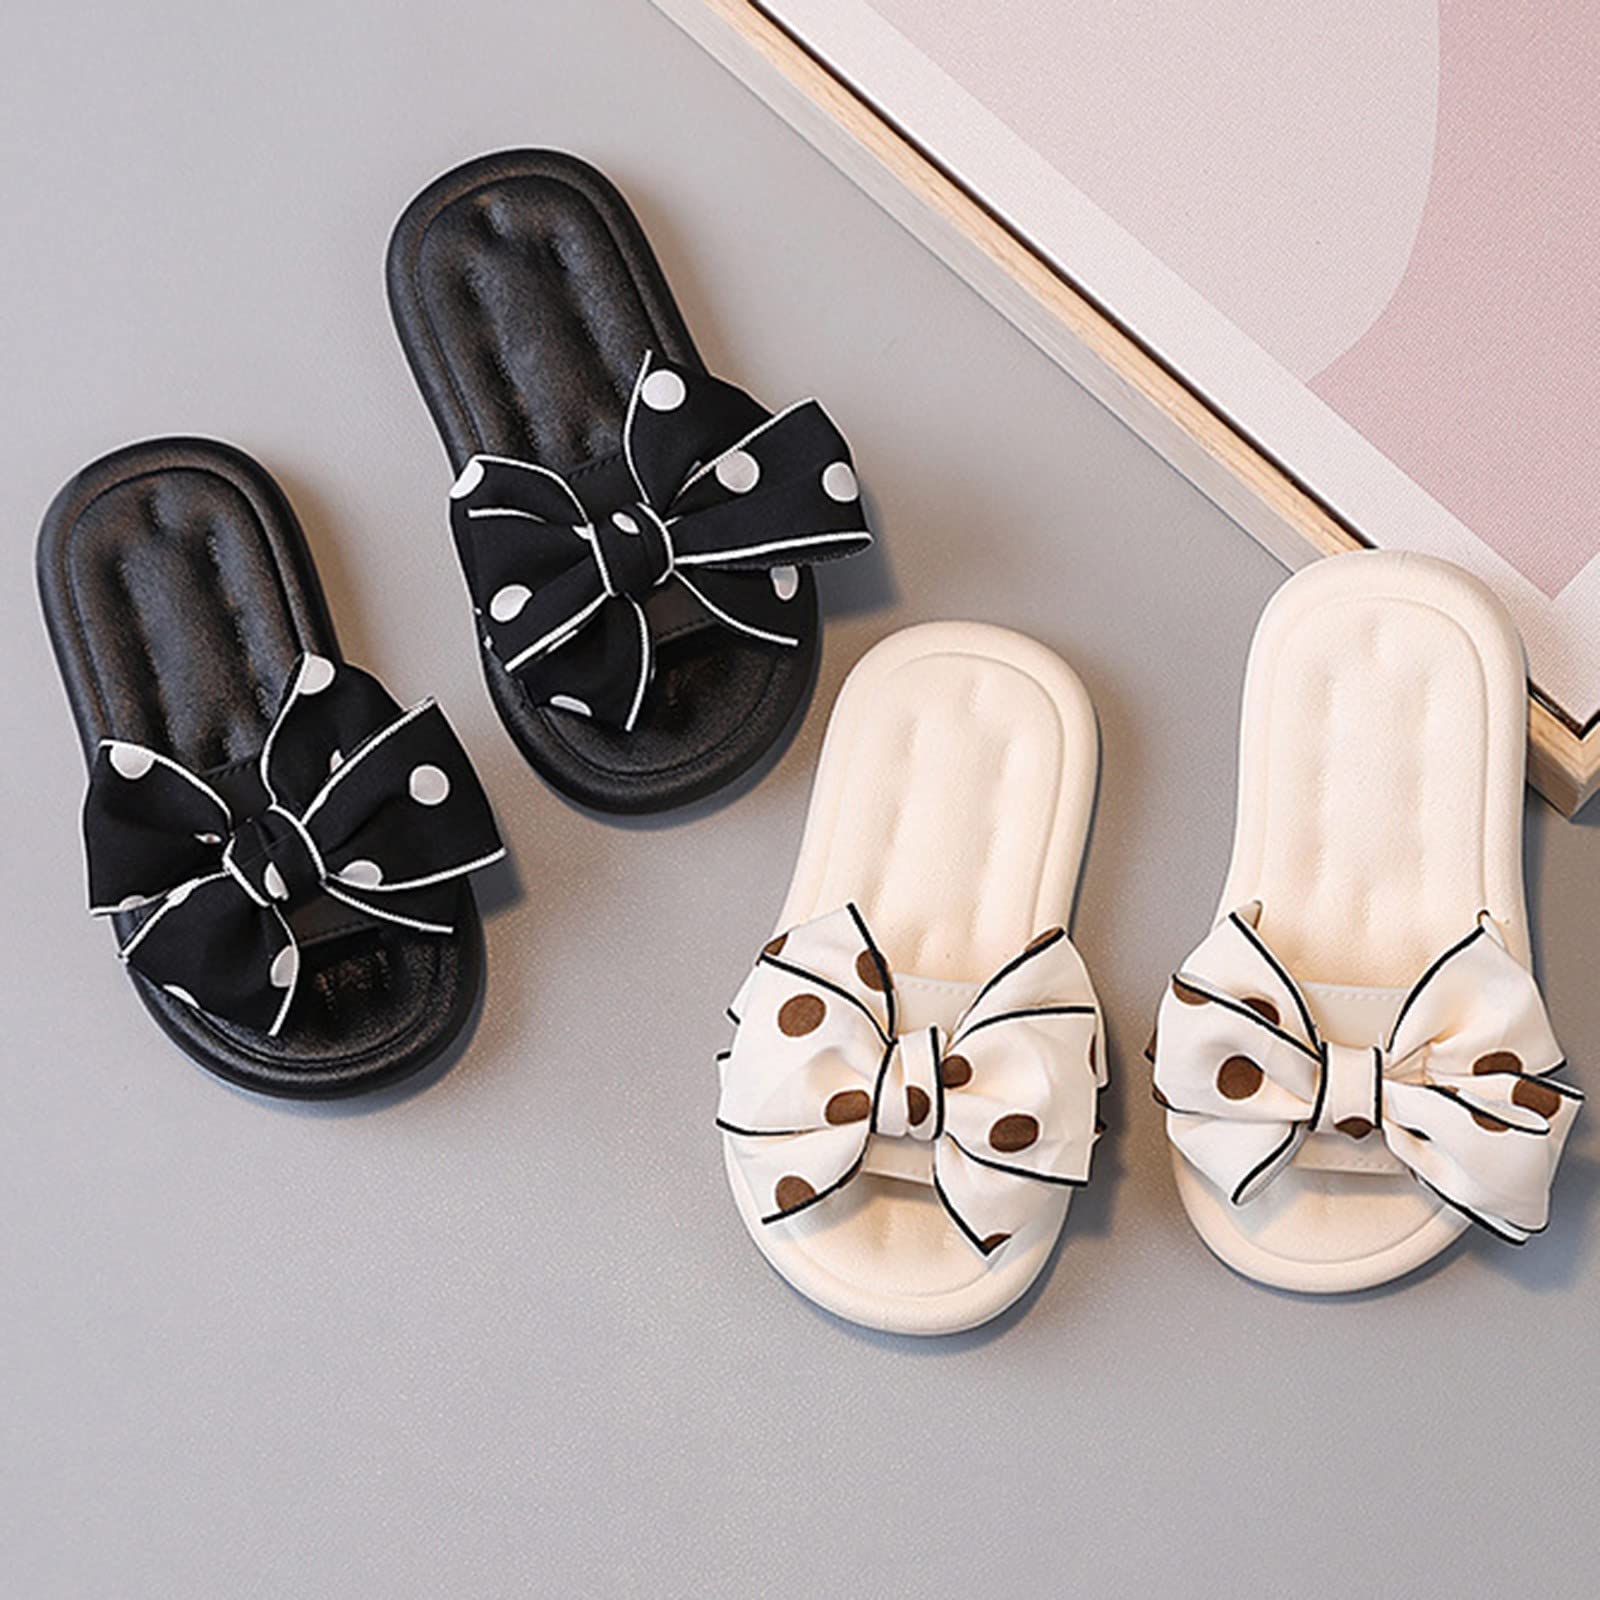 Girls Slippers Size 11 Children Shoes Fashion Slippers Bowknot Princess Household Shoes Cute Toddler 10 Sandals Girls